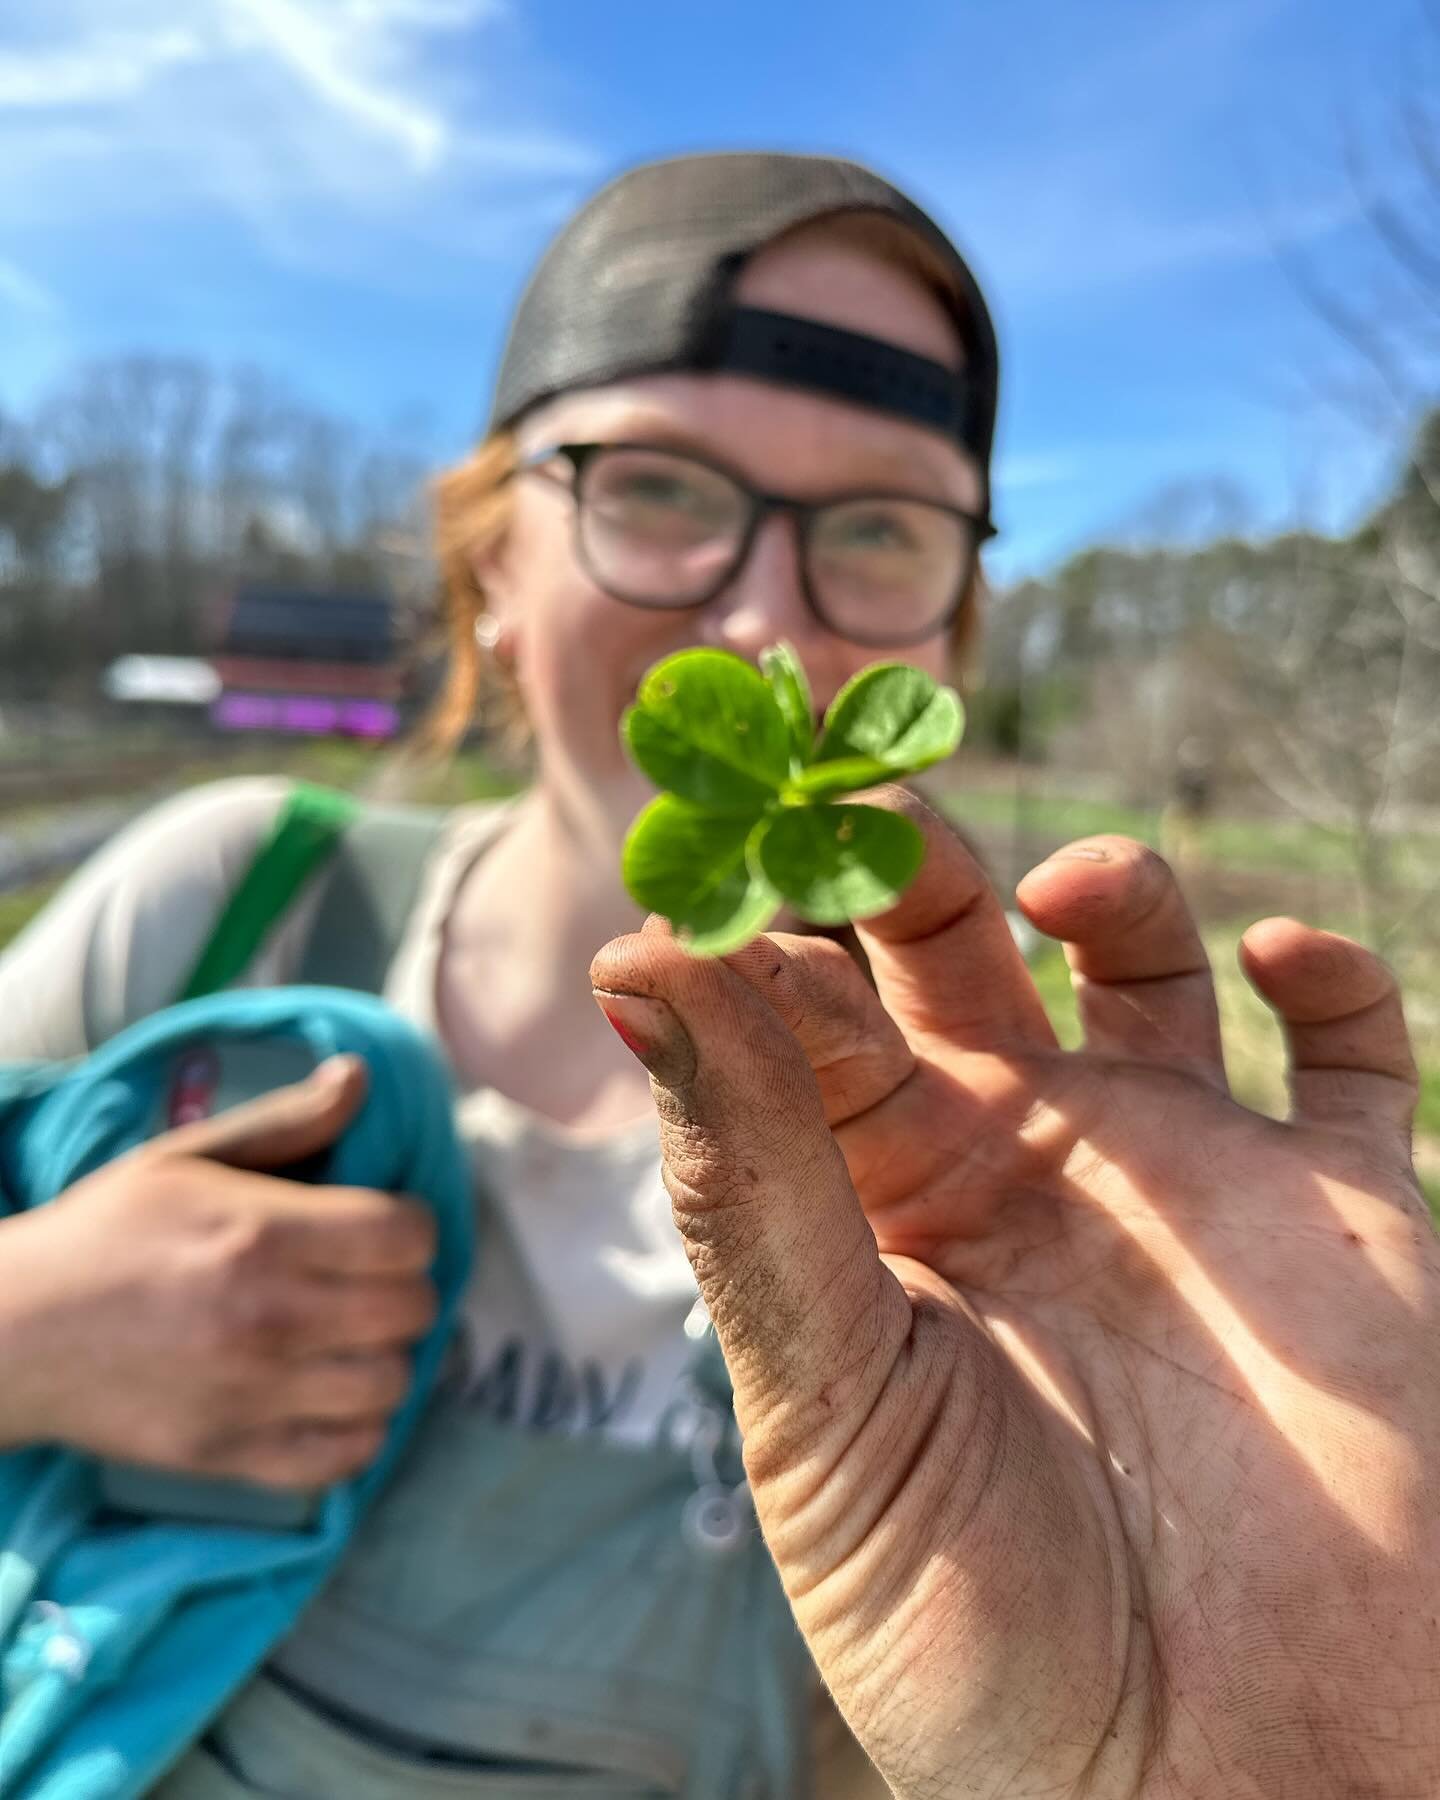 Some people have a knack for finding 4-leaf clovers.  Melanie, it turns out, has a gift for finding SIX-leaf clovers!  How lucky are we to have her on our farm team?! 🍀 🌈